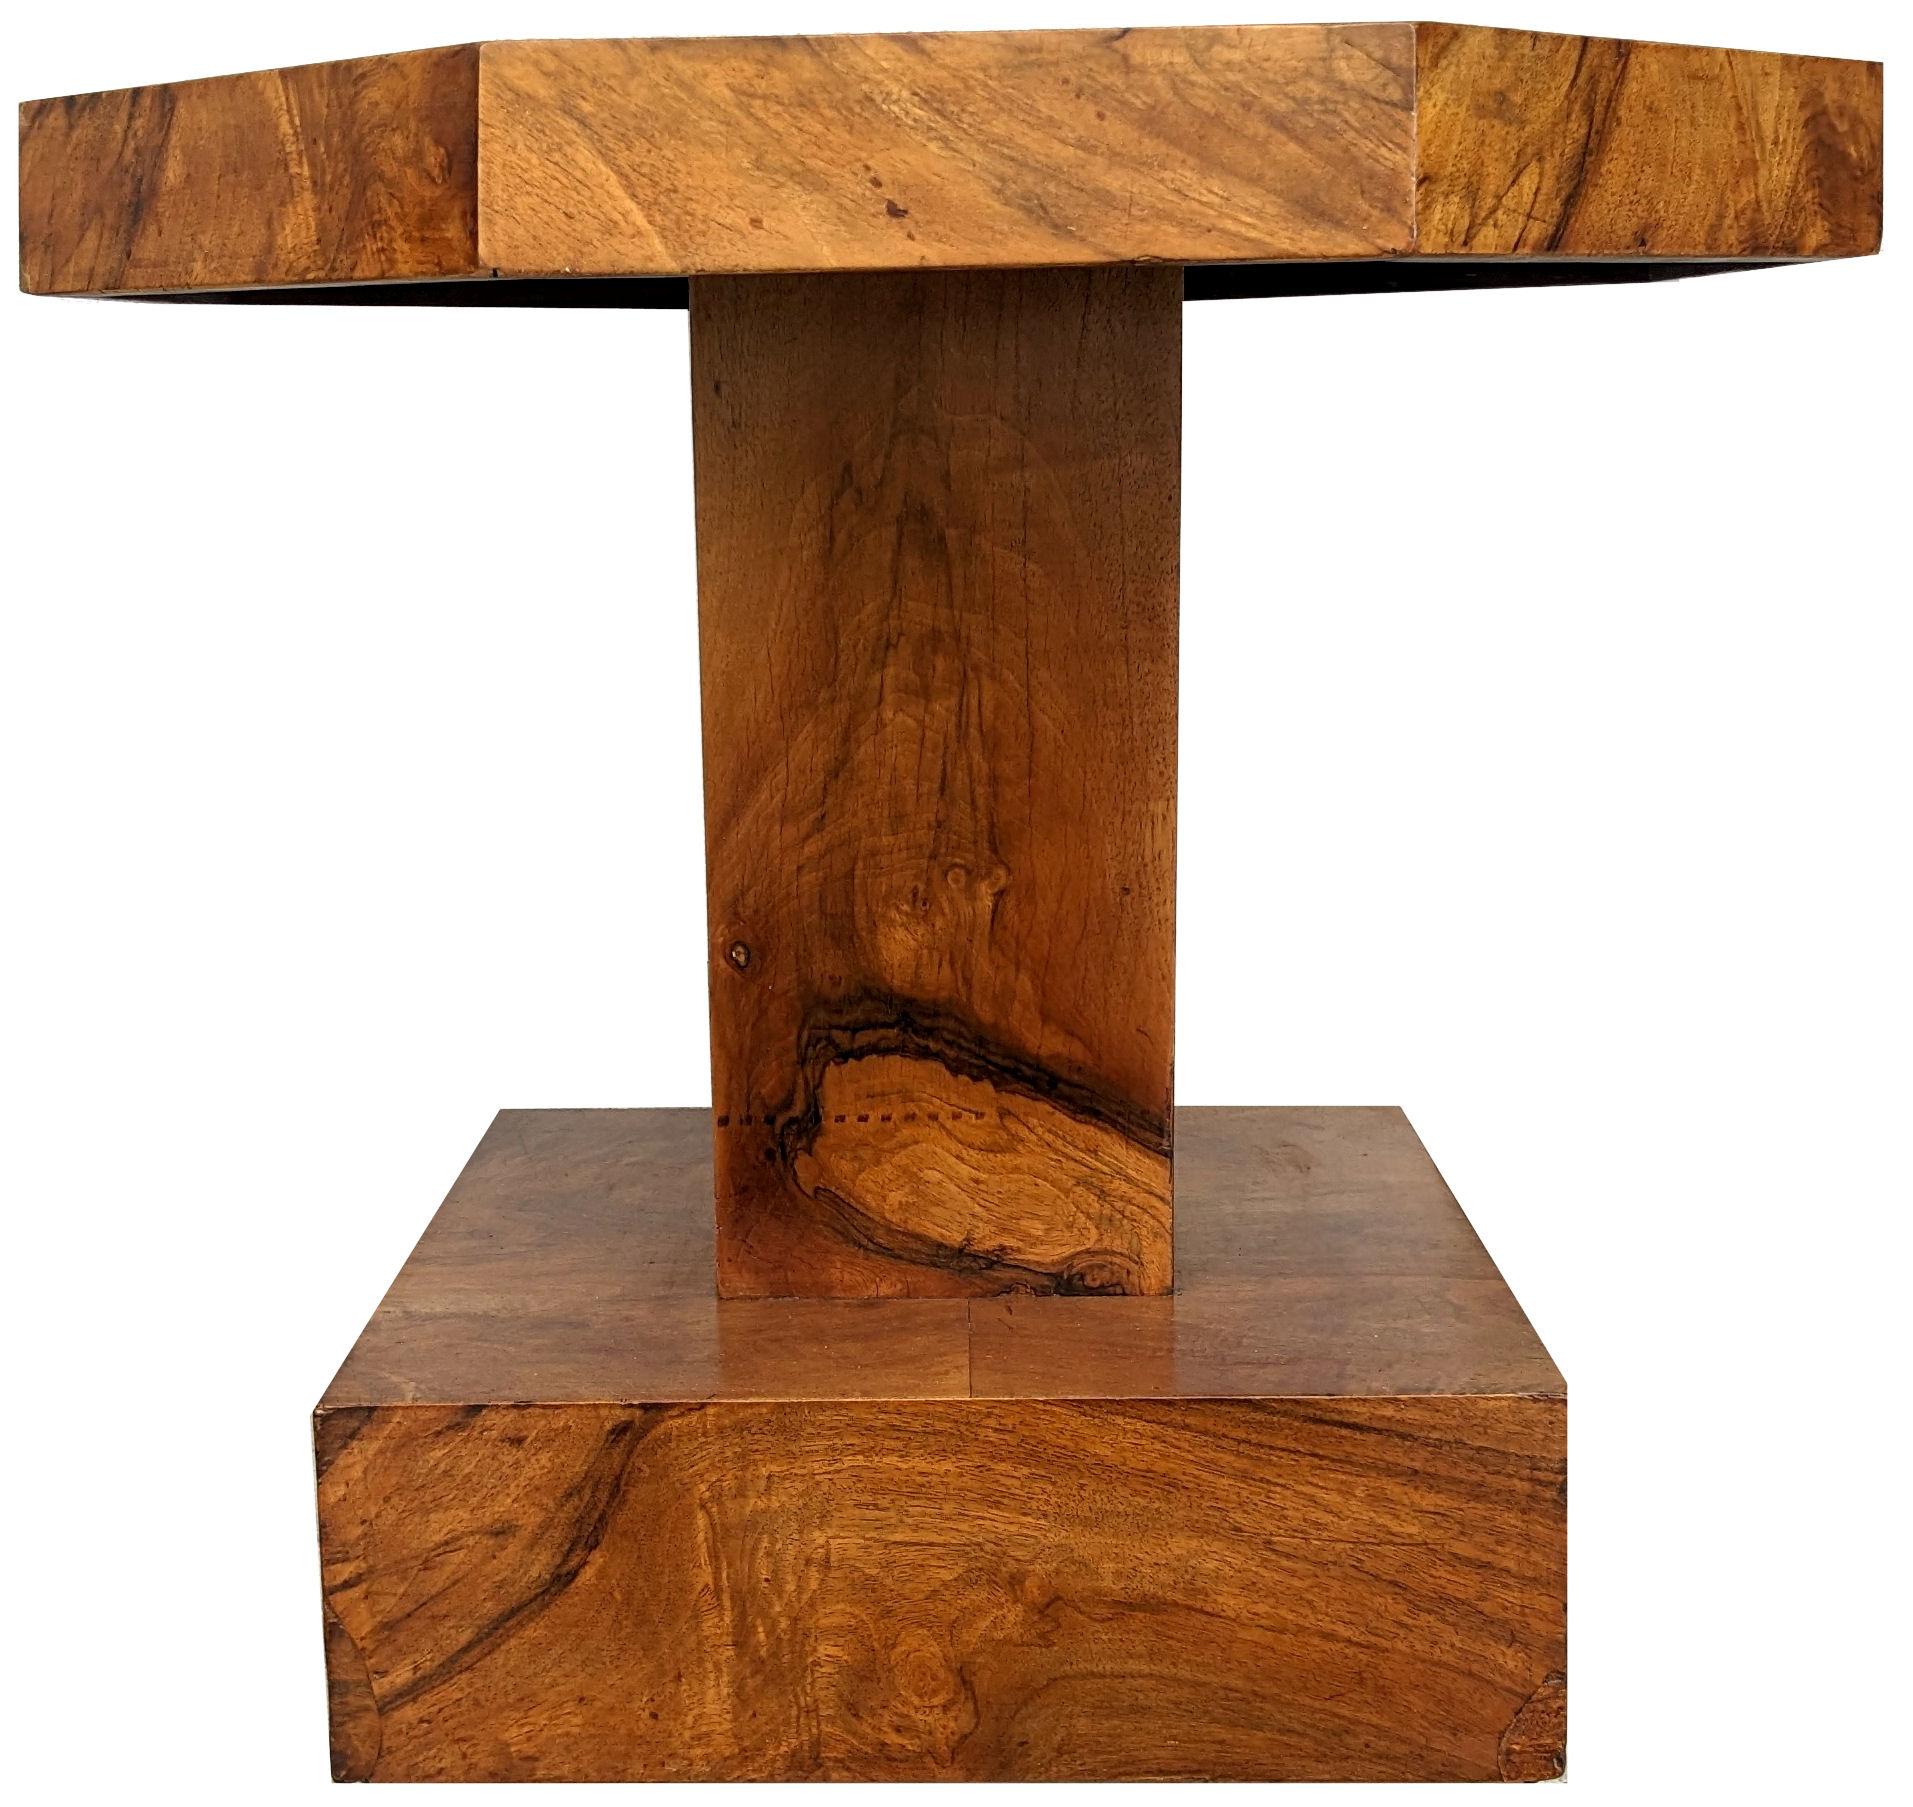 20th Century Art Deco Figured Walnut Occasional Table, English, c1930 For Sale